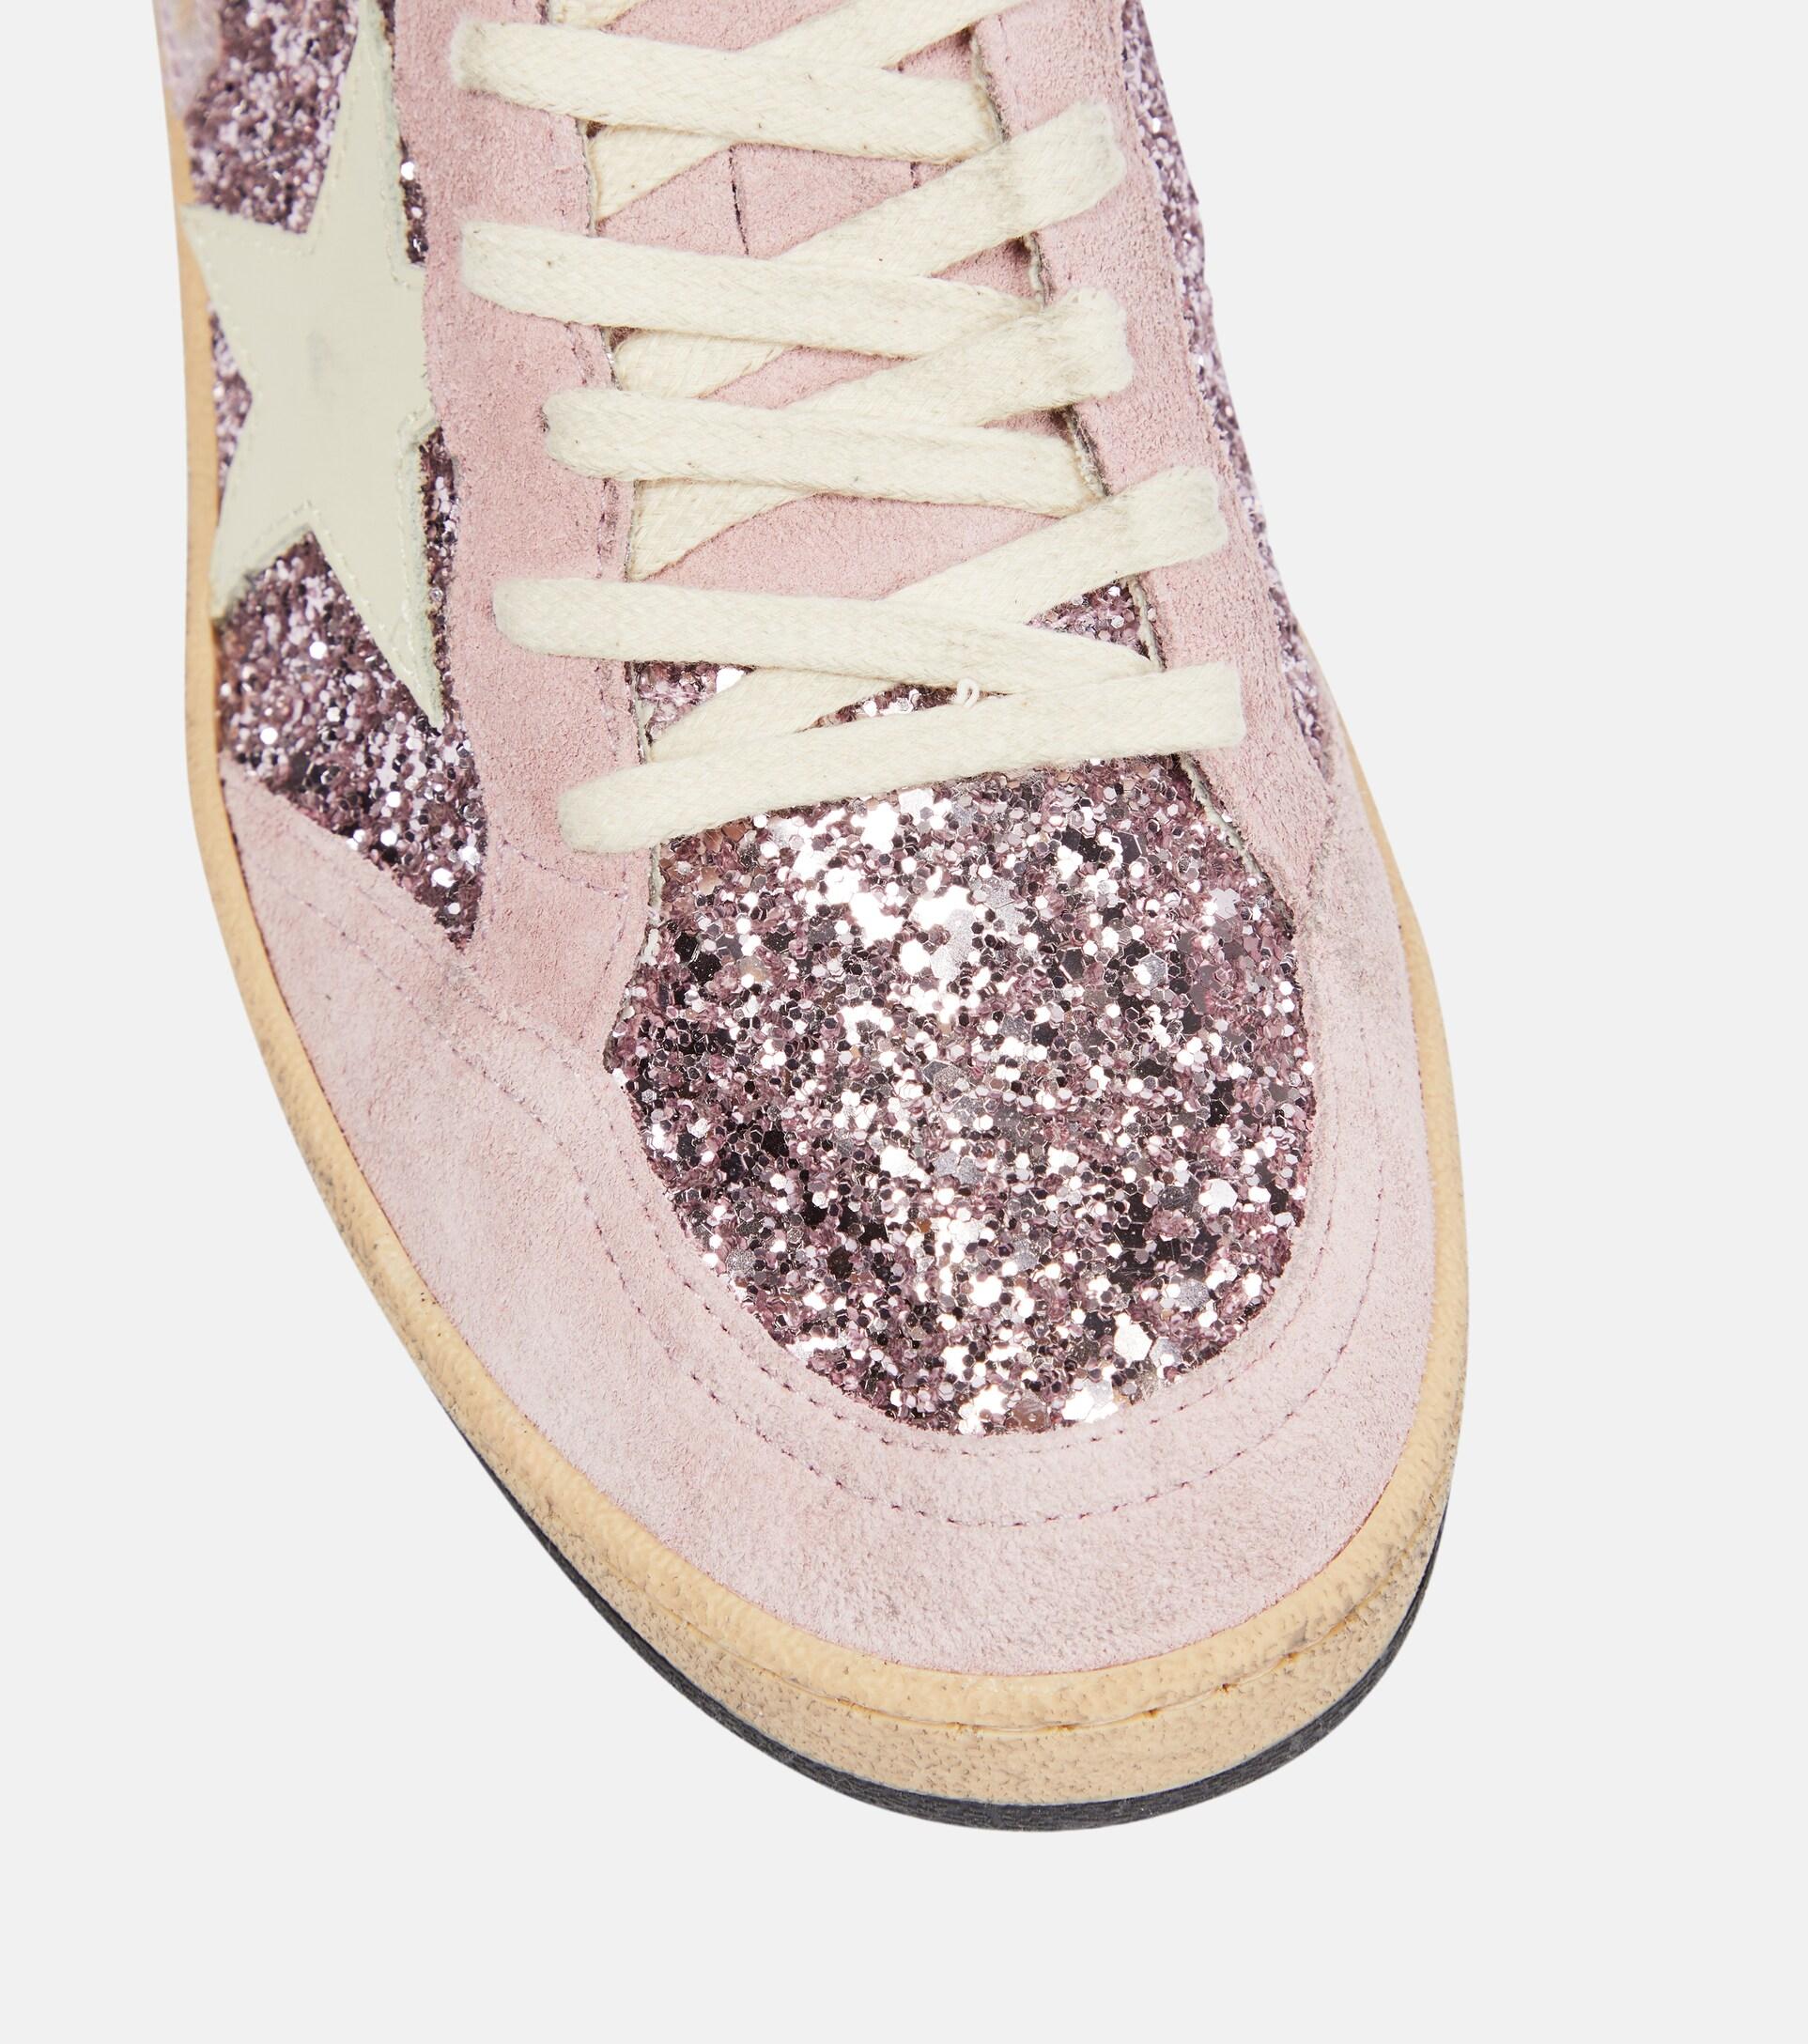 Golden Goose Ball Star Glitter Suede Sneakers in Pink | Lyst